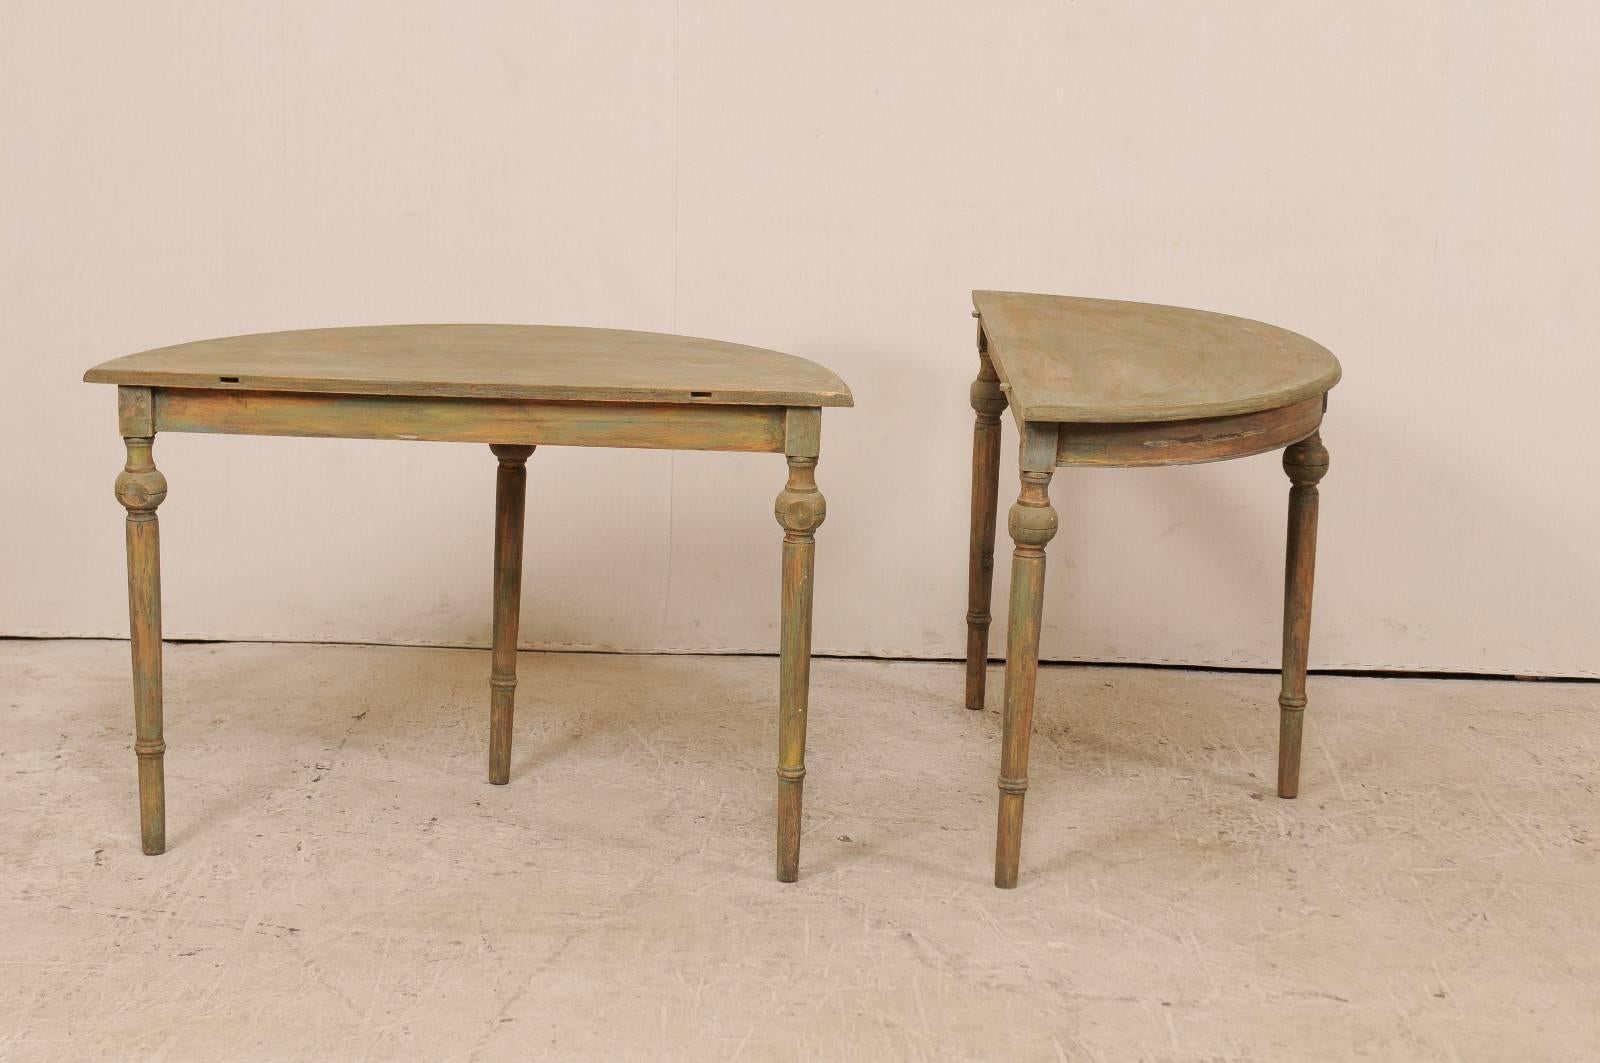 Pair of 19th Century Swedish Painted Wood Demilune Tables in Warm Sage Hues 2